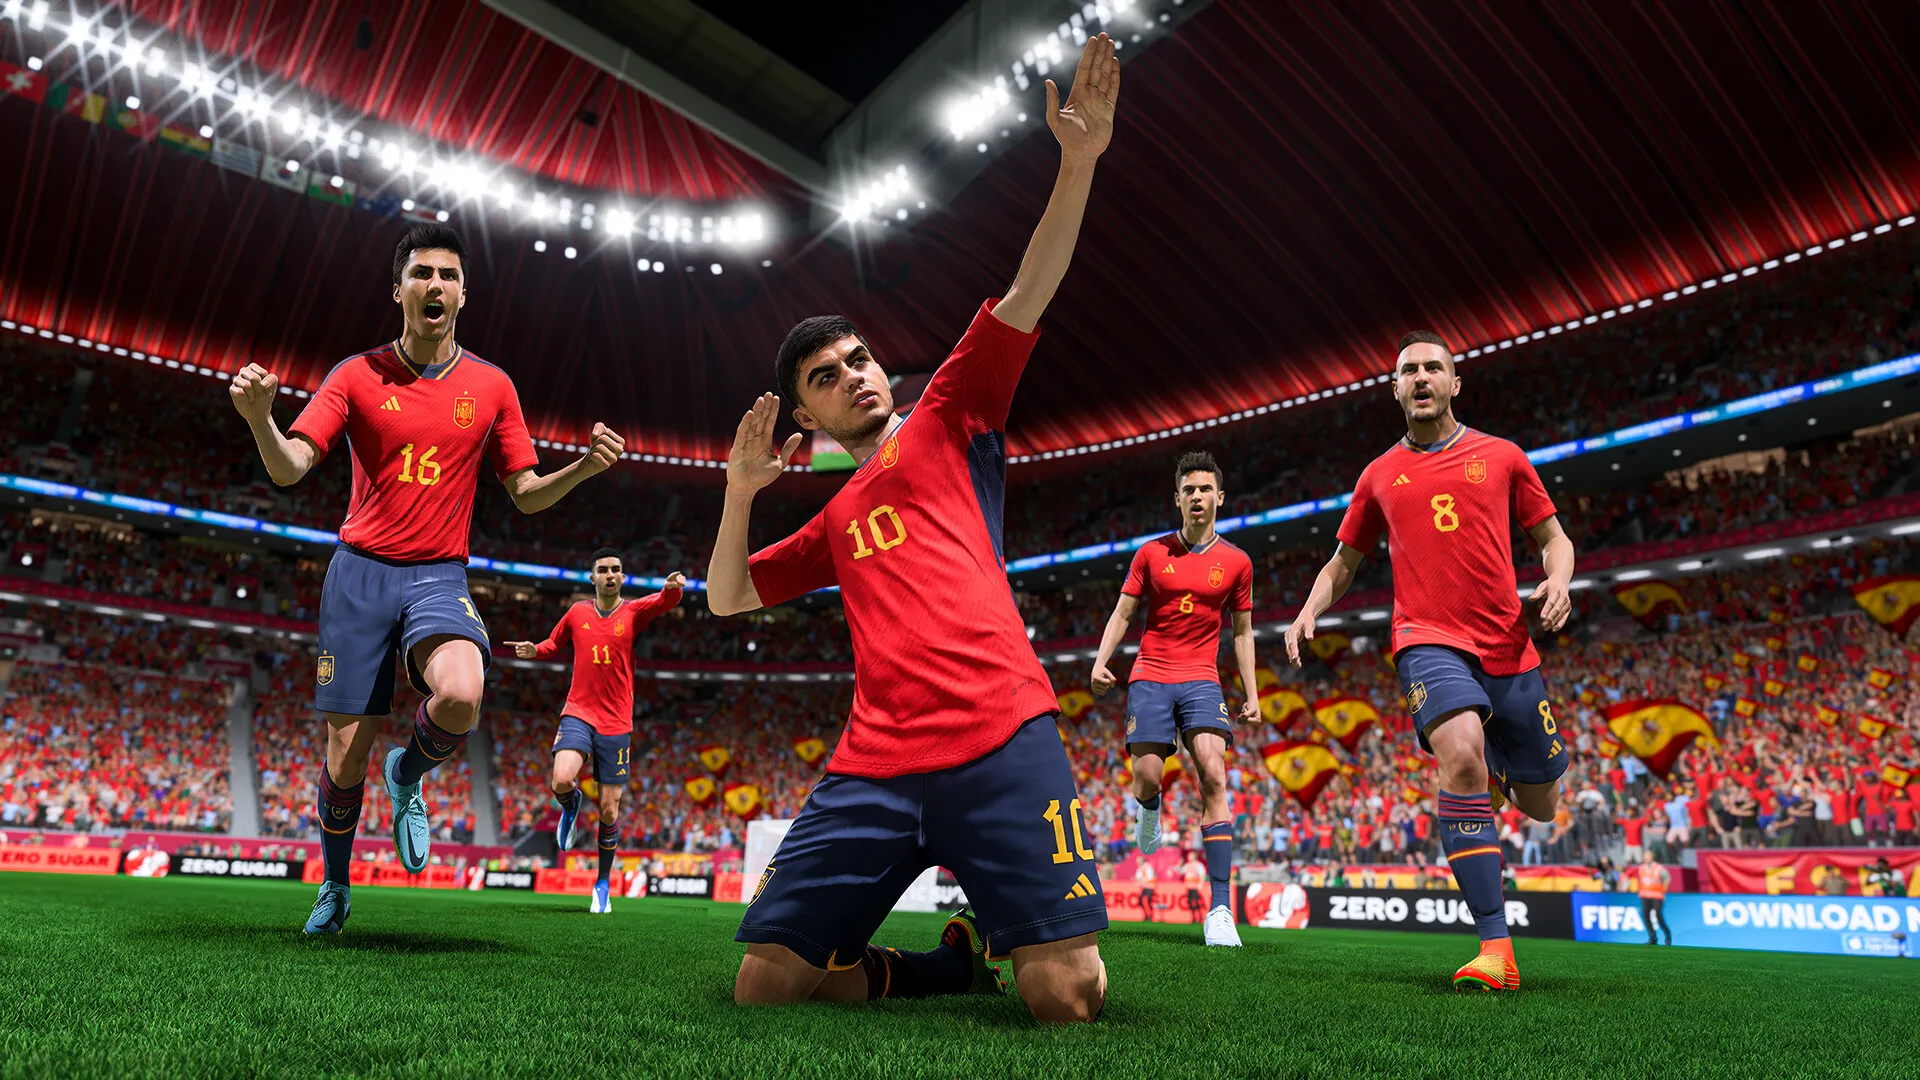 Every team at the 2022 World Cup ranked from best to worst based on FIFA 23 ratings